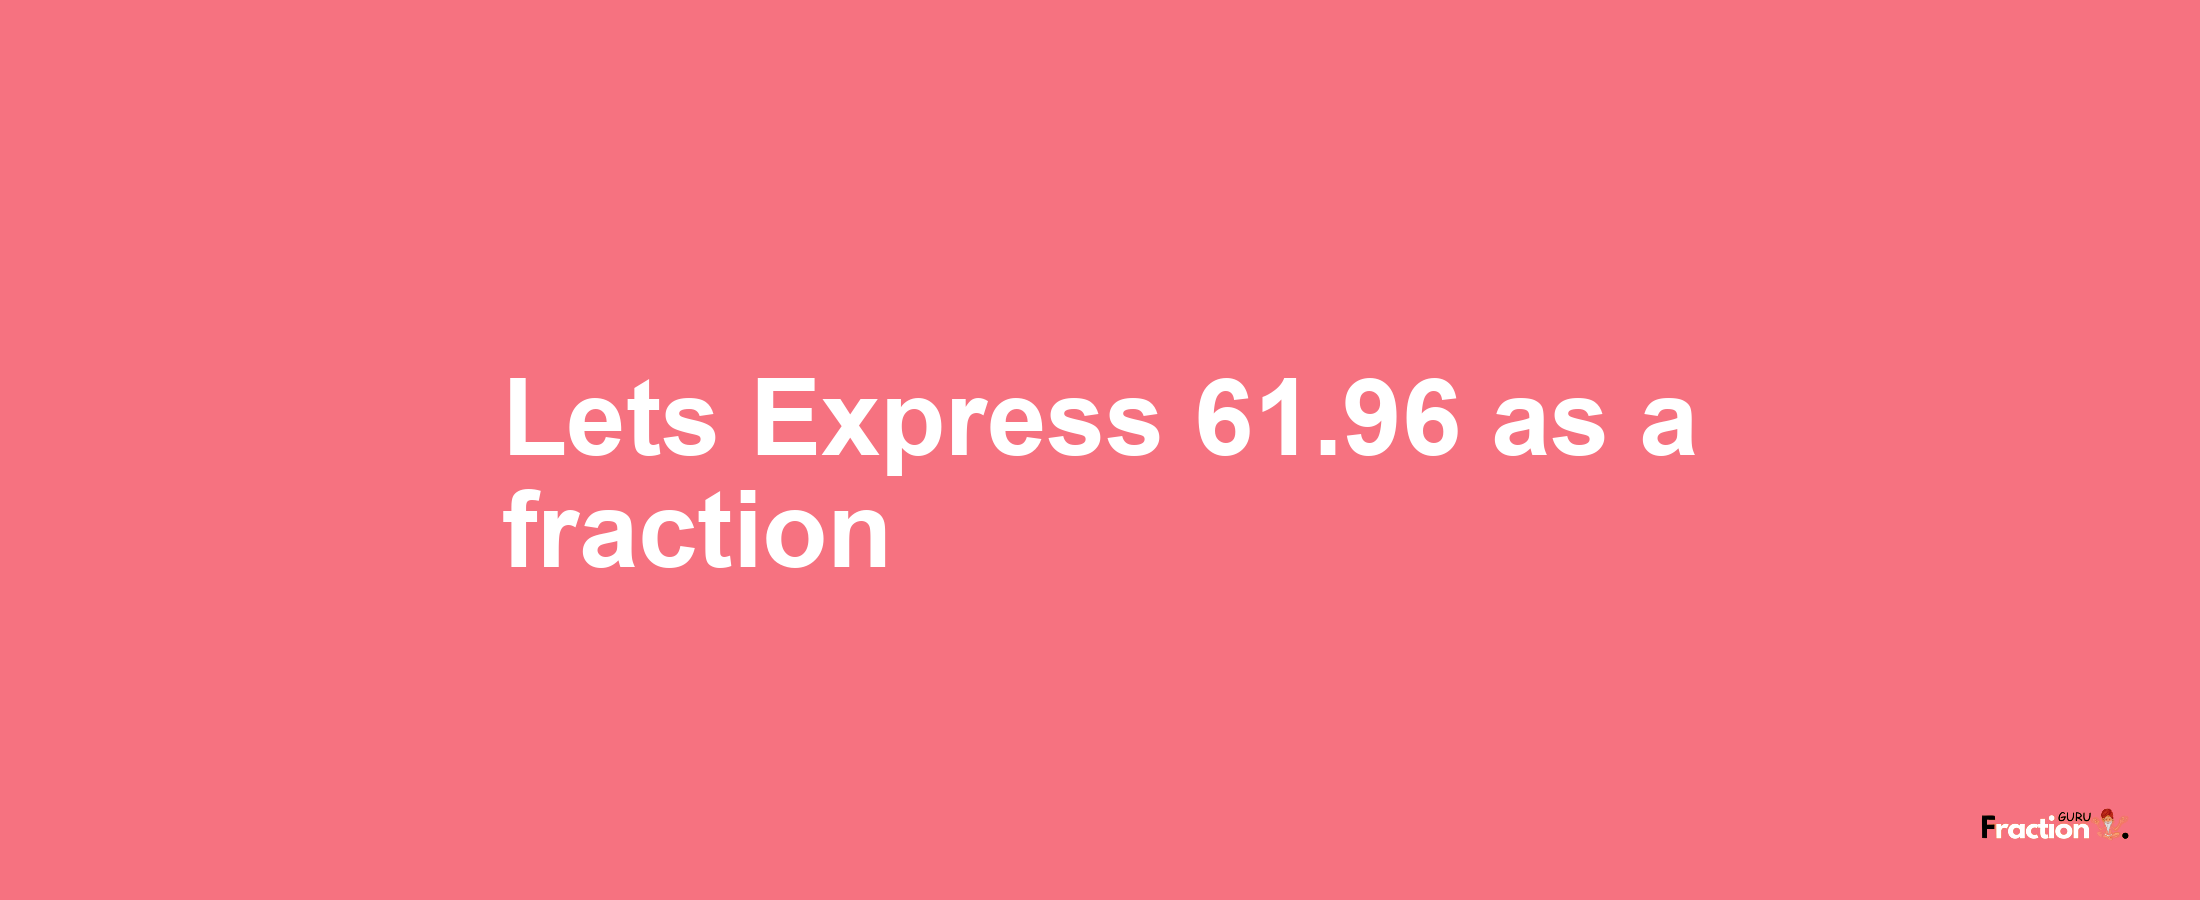 Lets Express 61.96 as afraction